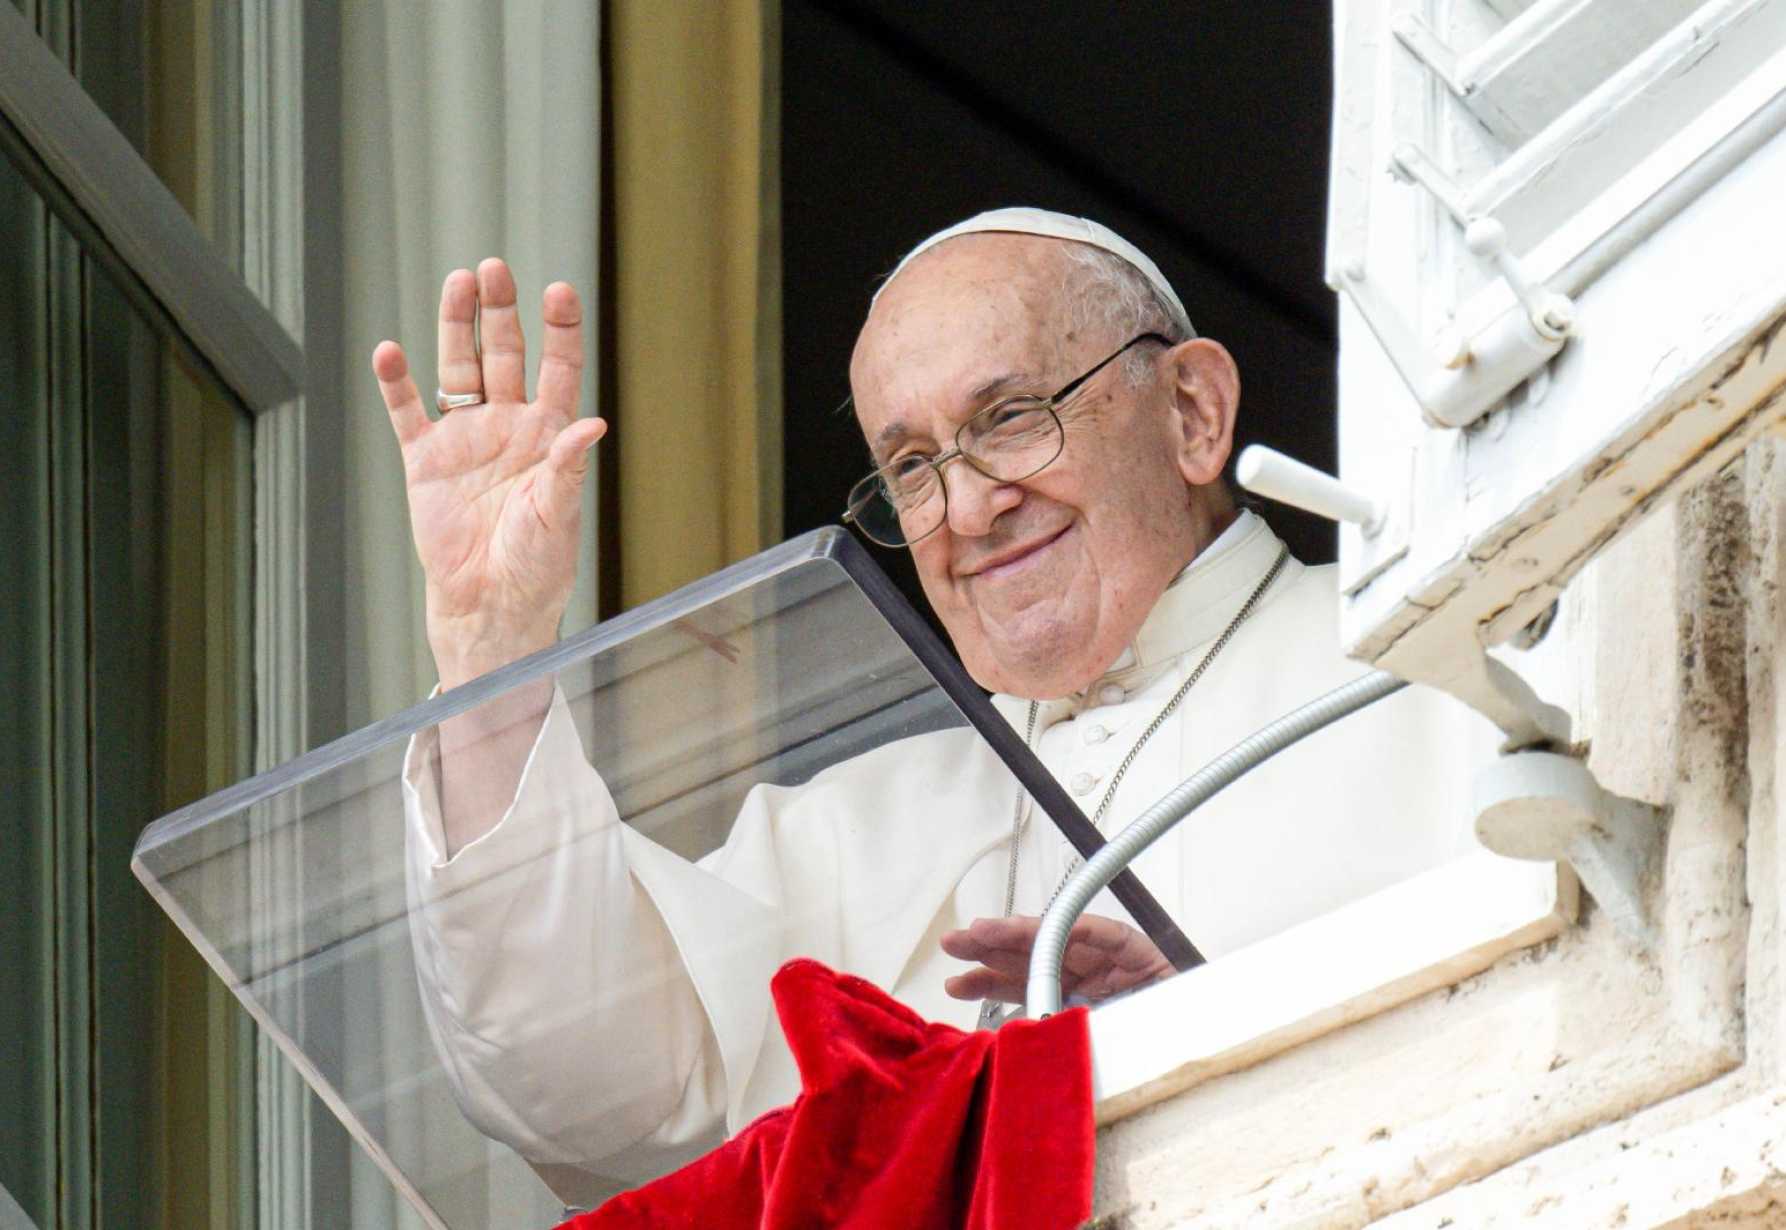 Jesus, the living God, helps believers on path to holiness, pope says